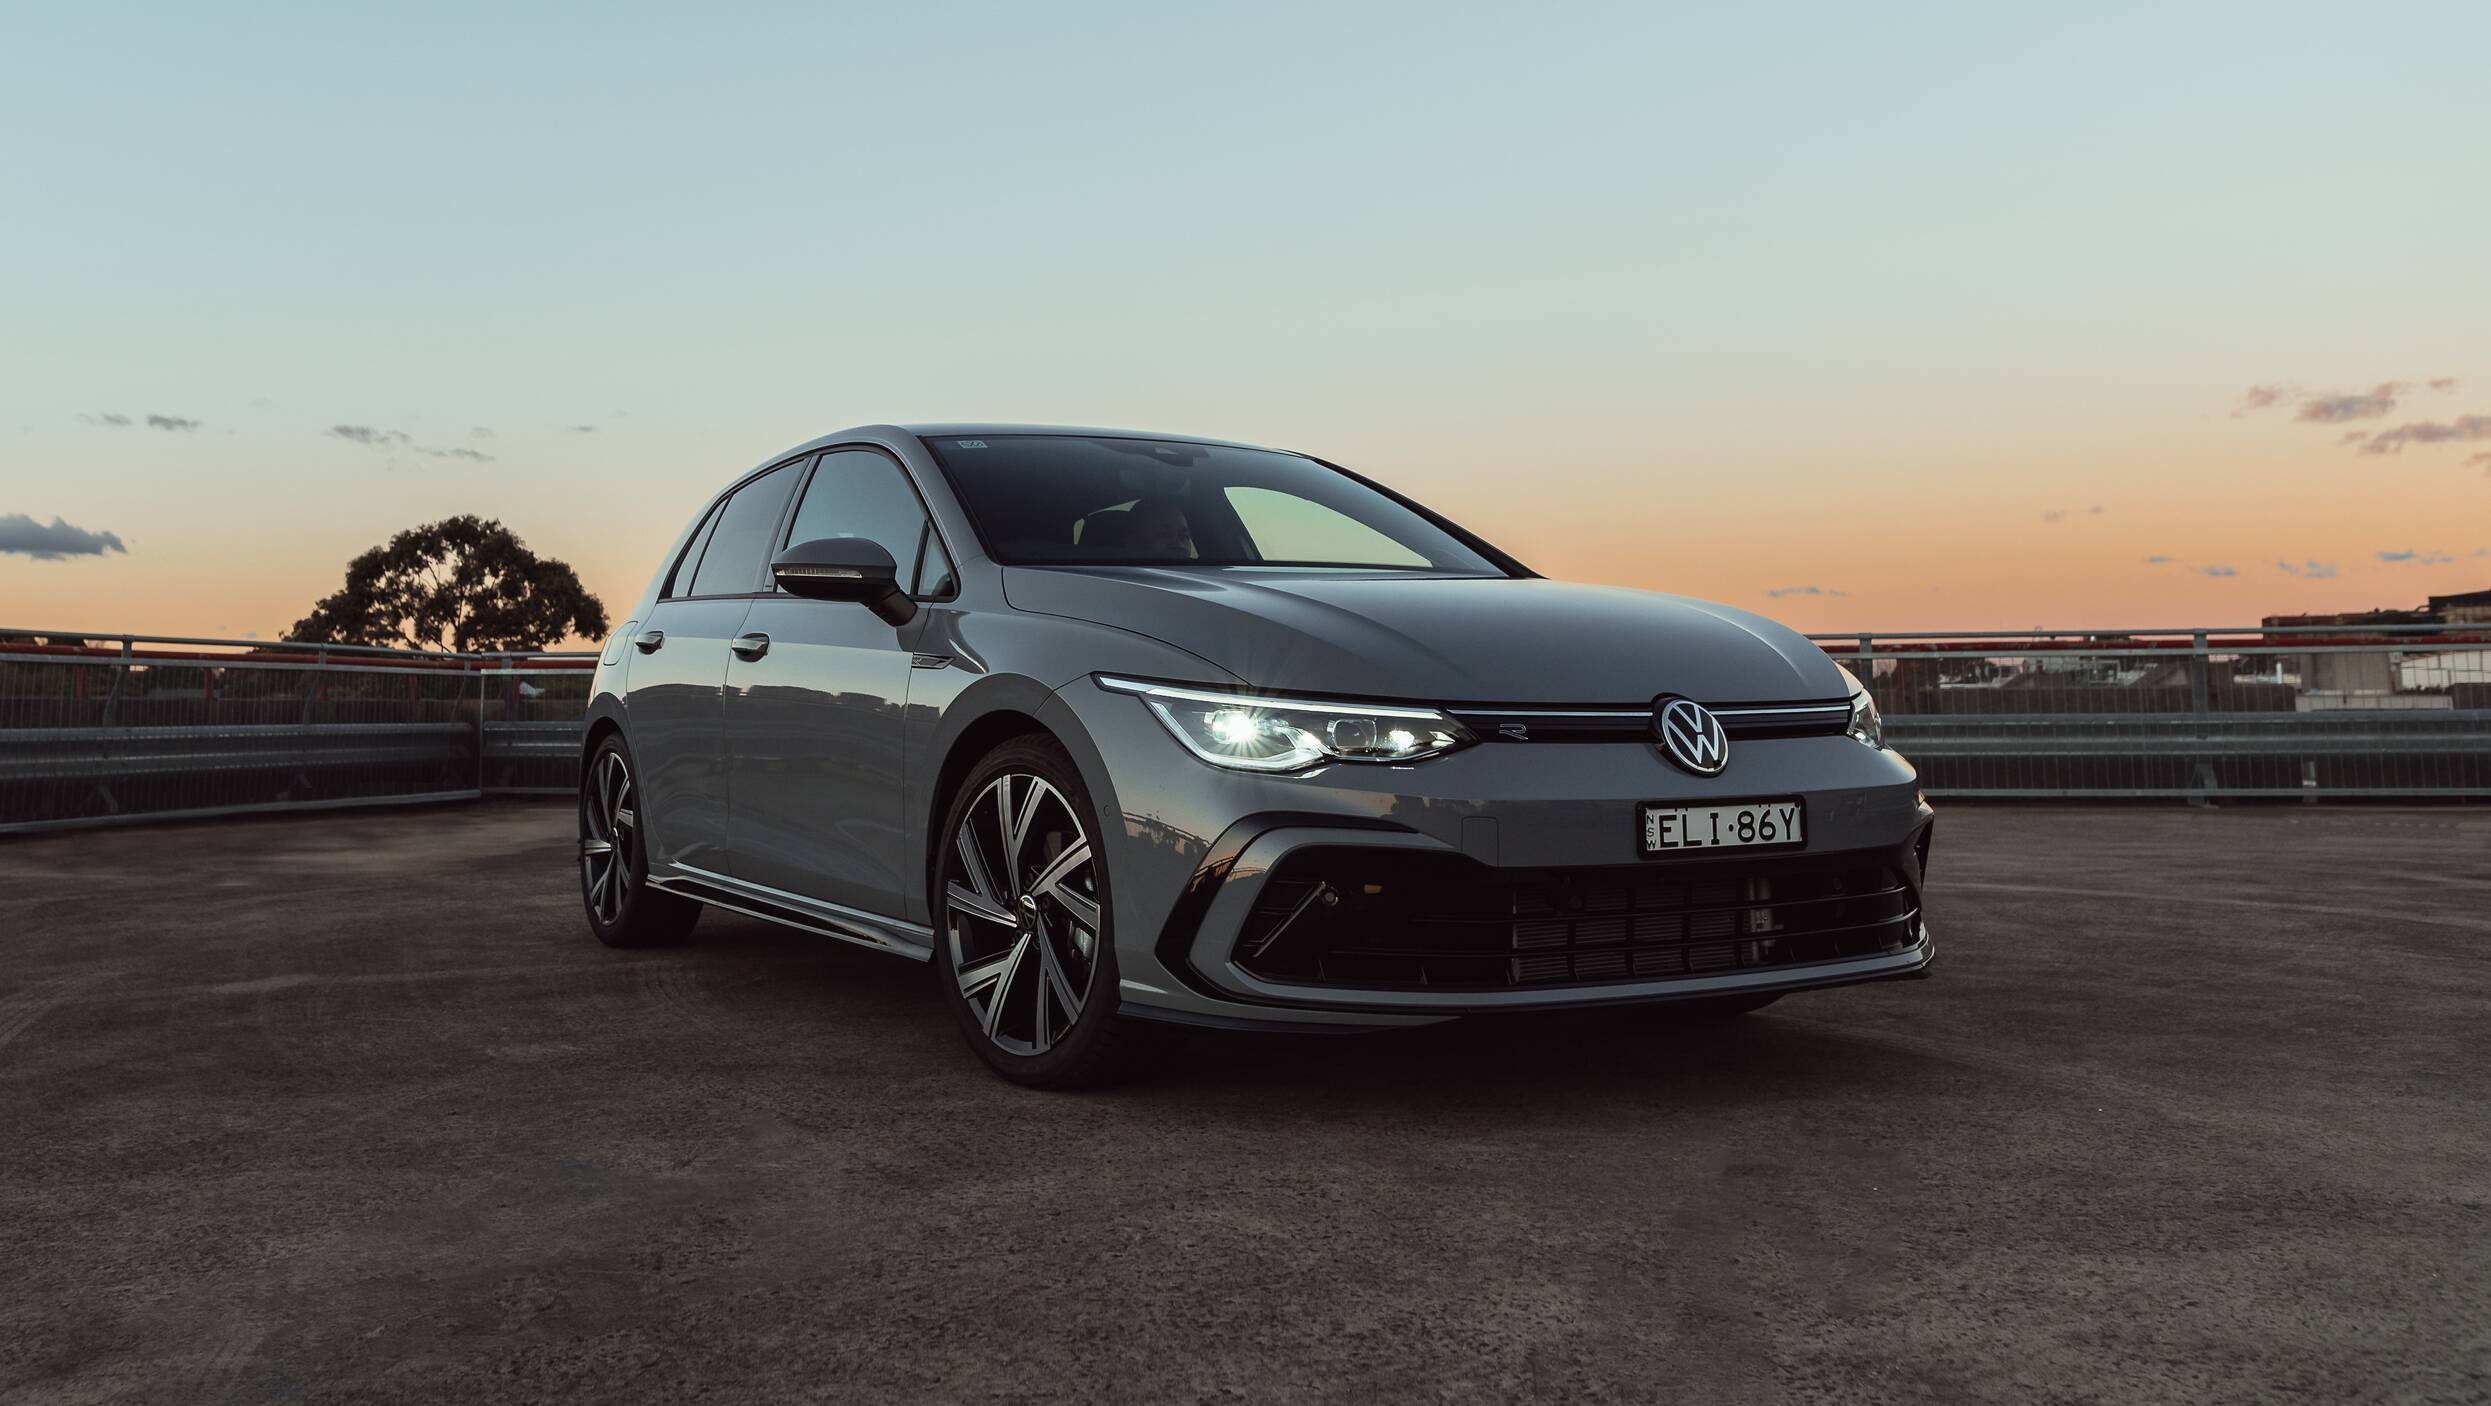 https://carsguide-res.cloudinary.com/image/upload/f_auto%2Cfl_lossy%2Cq_auto%2Ct_default/v1/editorial/review/hero_image/vw-golf-r-line-8-my21-1001x565-%281%29.jpg